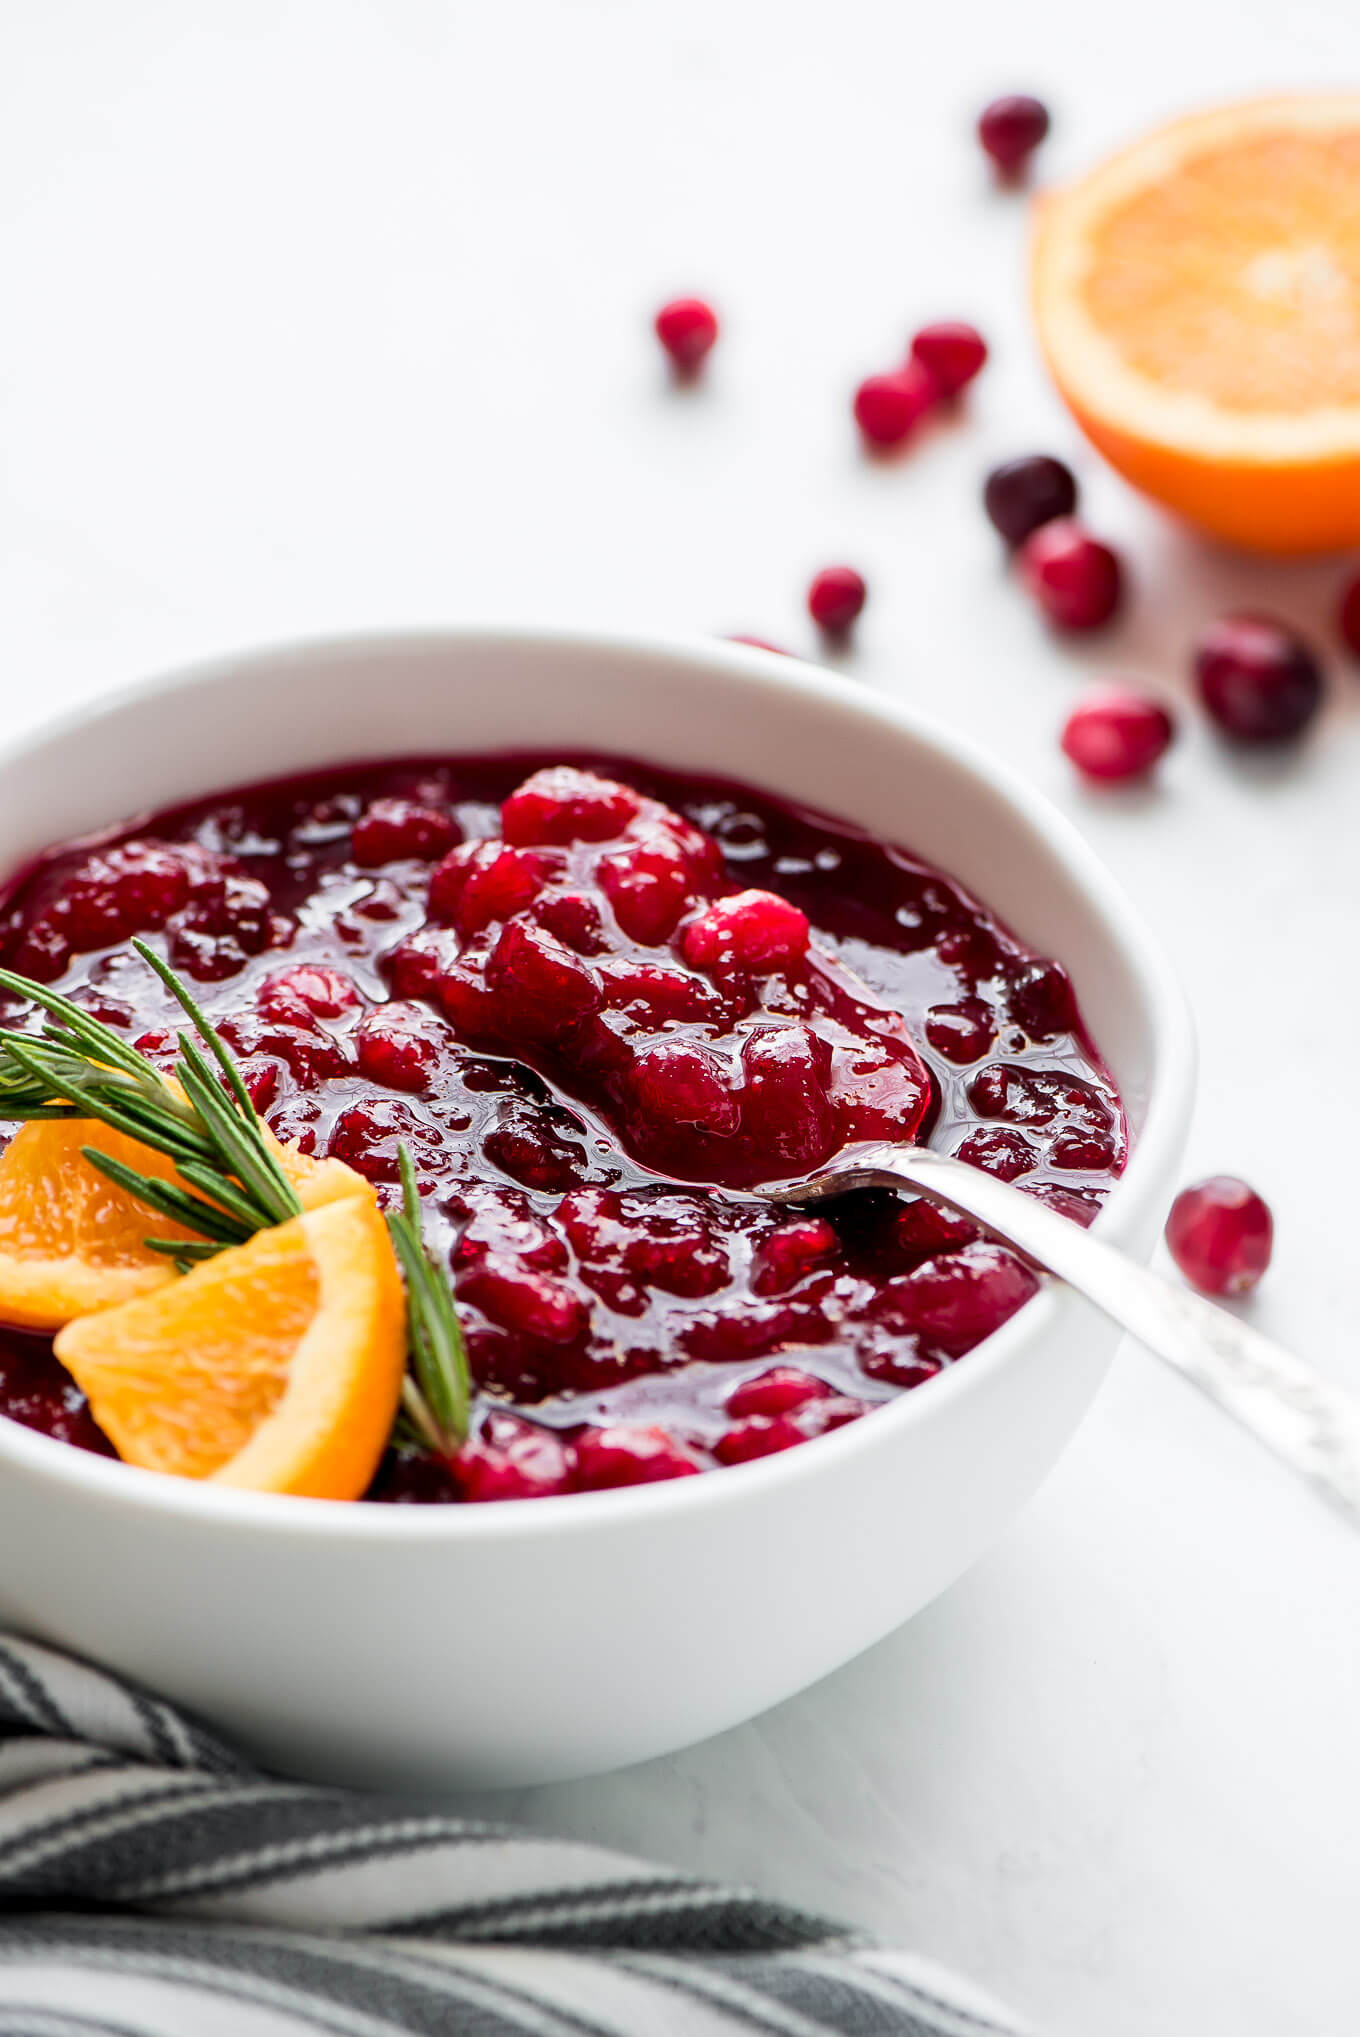 A spoon scooping up some cranberry sauce from a bowl.